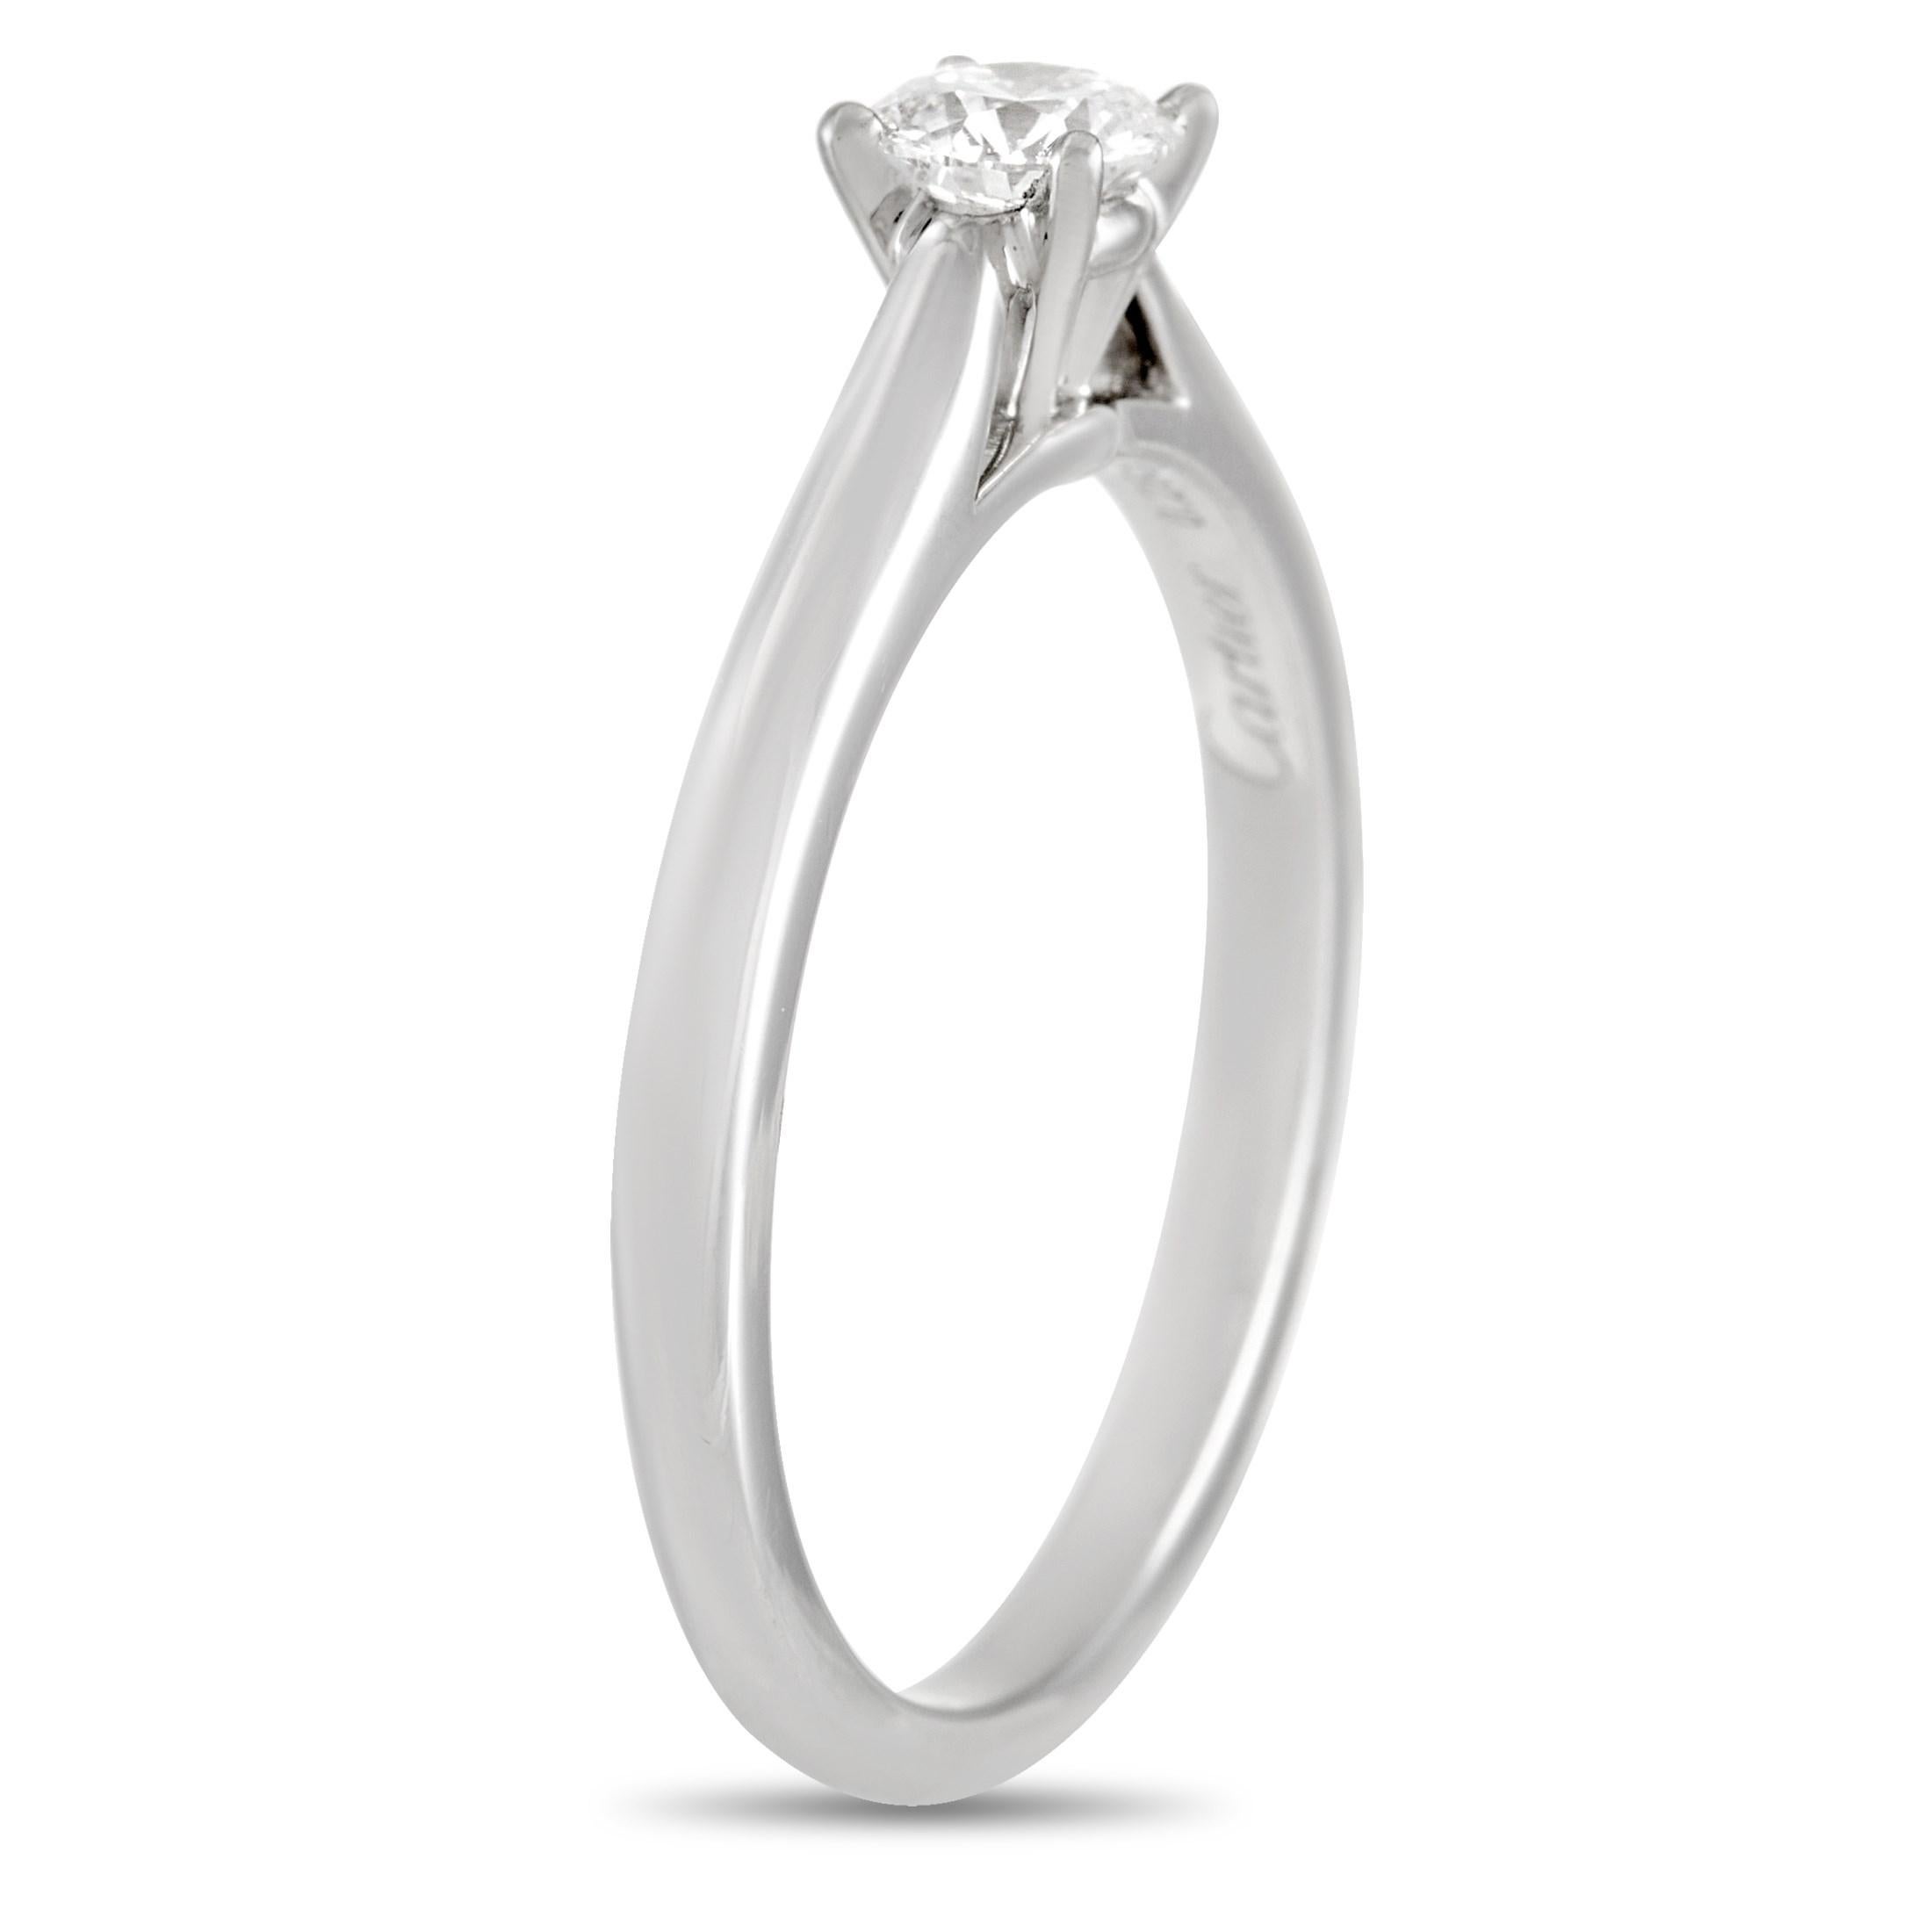 Looking minimal and elegant, the Cartier Platinum 0.26 ct Diamond Engagement Ring has a subtle beauty that will still catch attention. There is sophistication in its simplicity. The ring has a 2mm narrow band and G-VVS2 diamond that's approximately